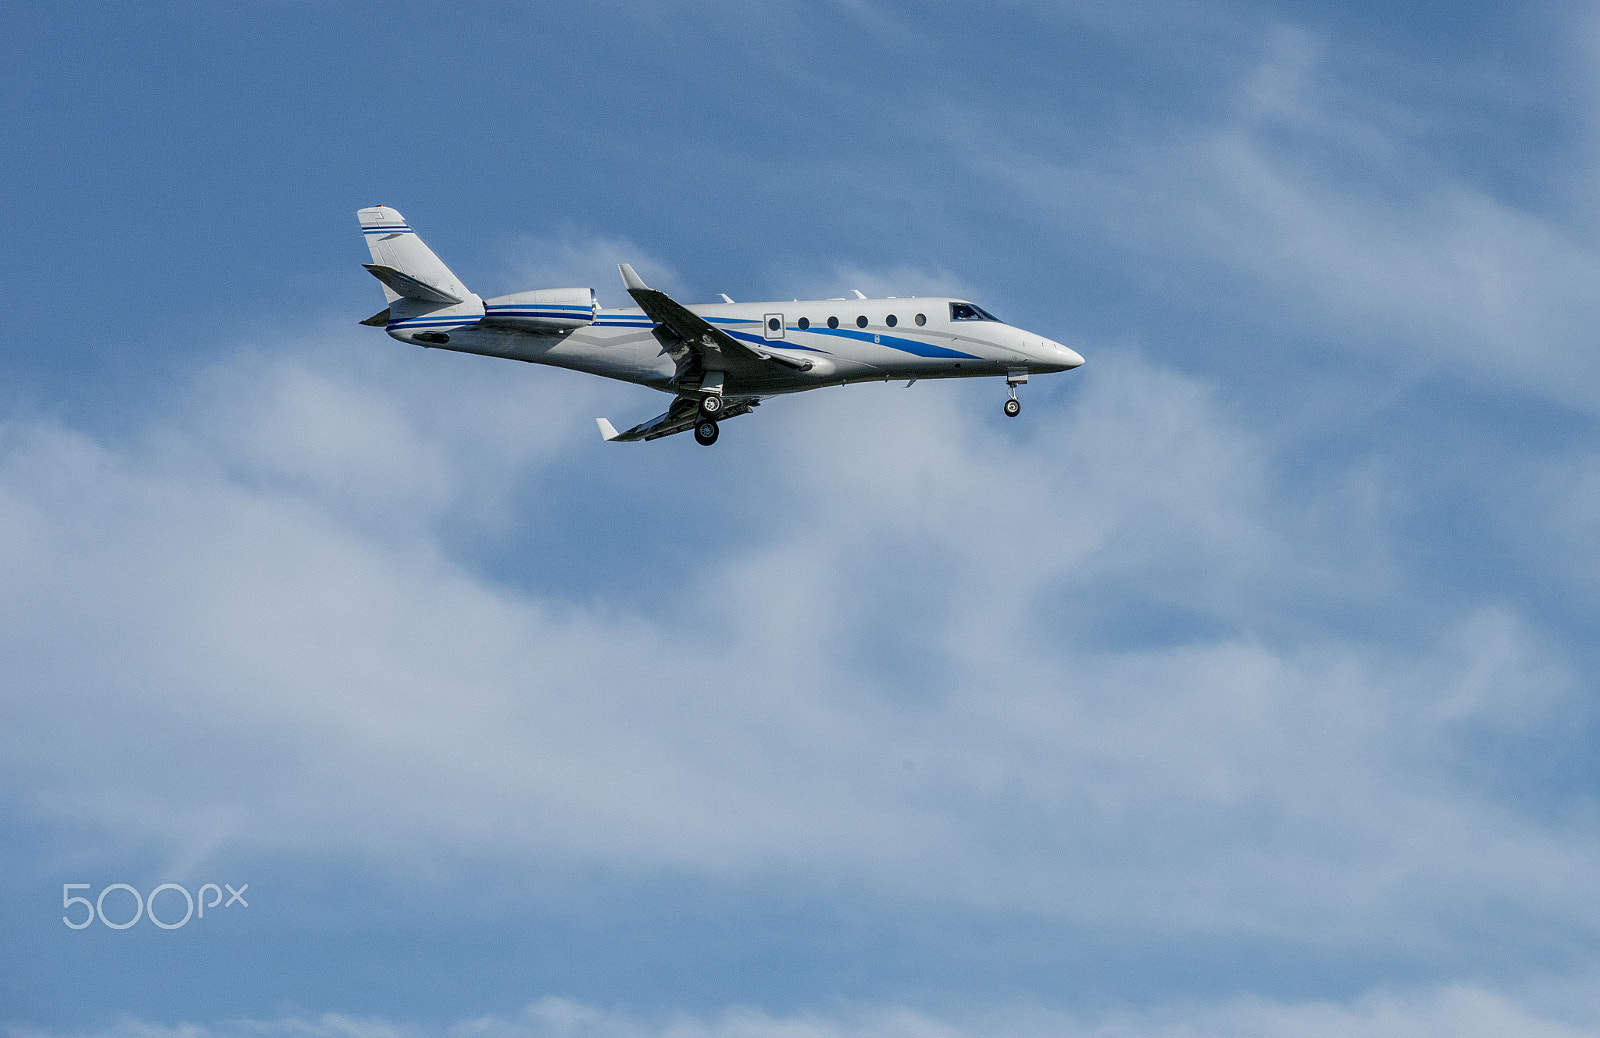 Nikon D800 sample photo. Jets coming and going from our local airport photography